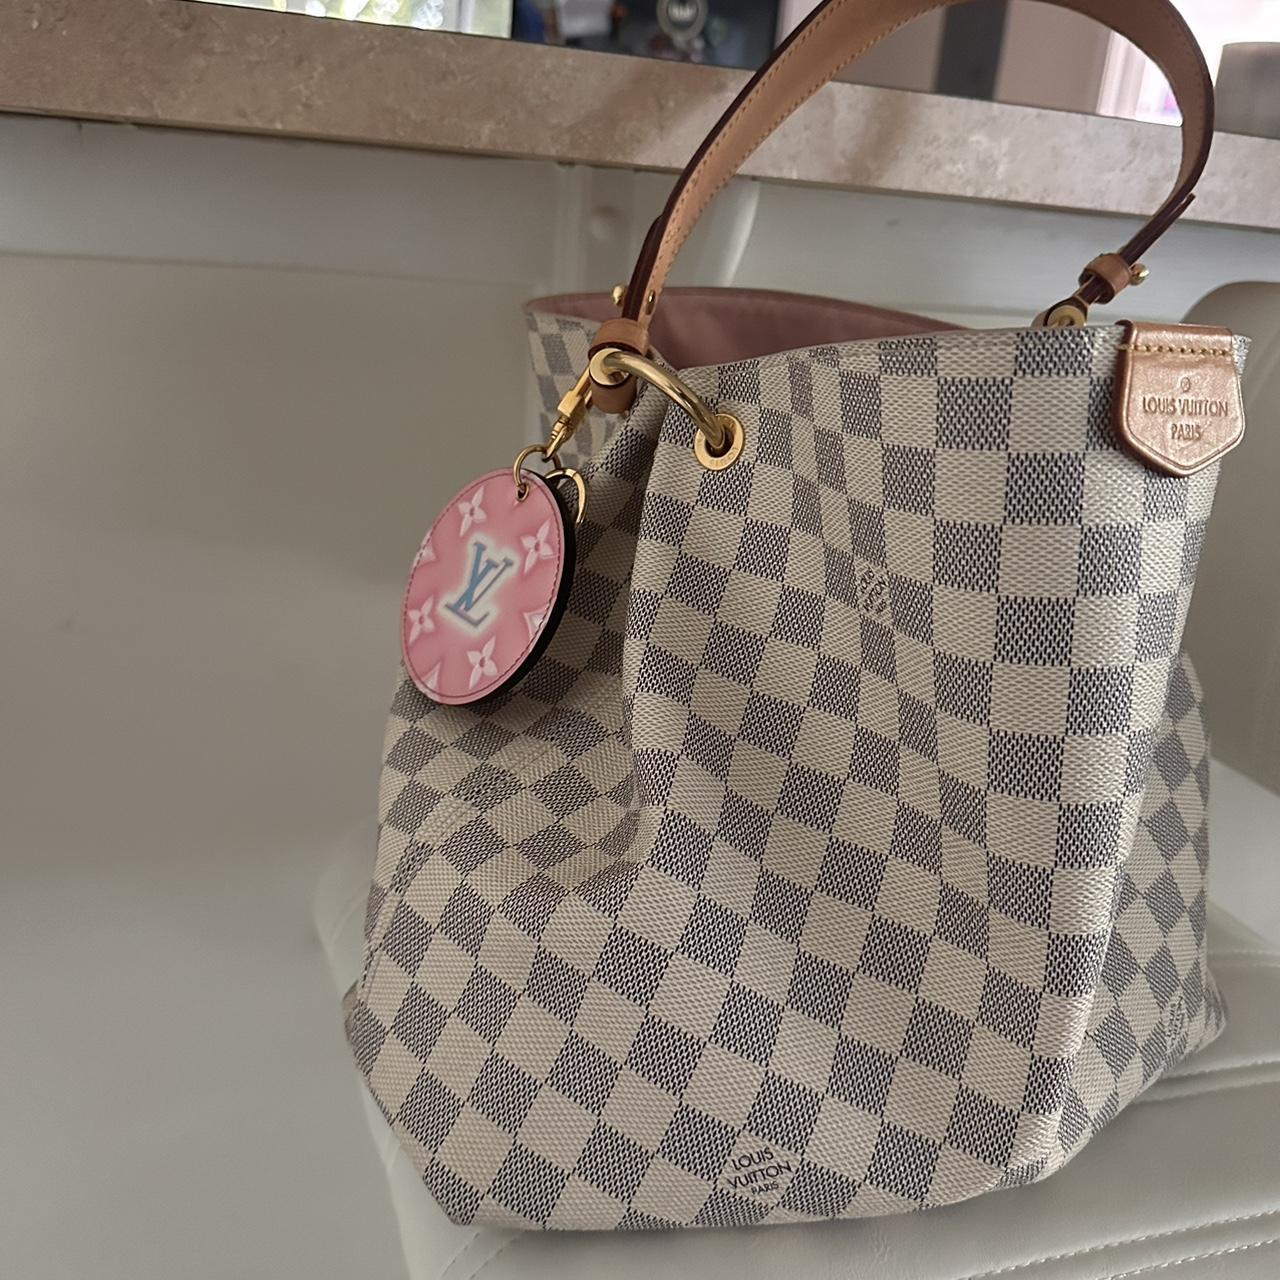 louis vuitton pm graceful & charm. $100 off without